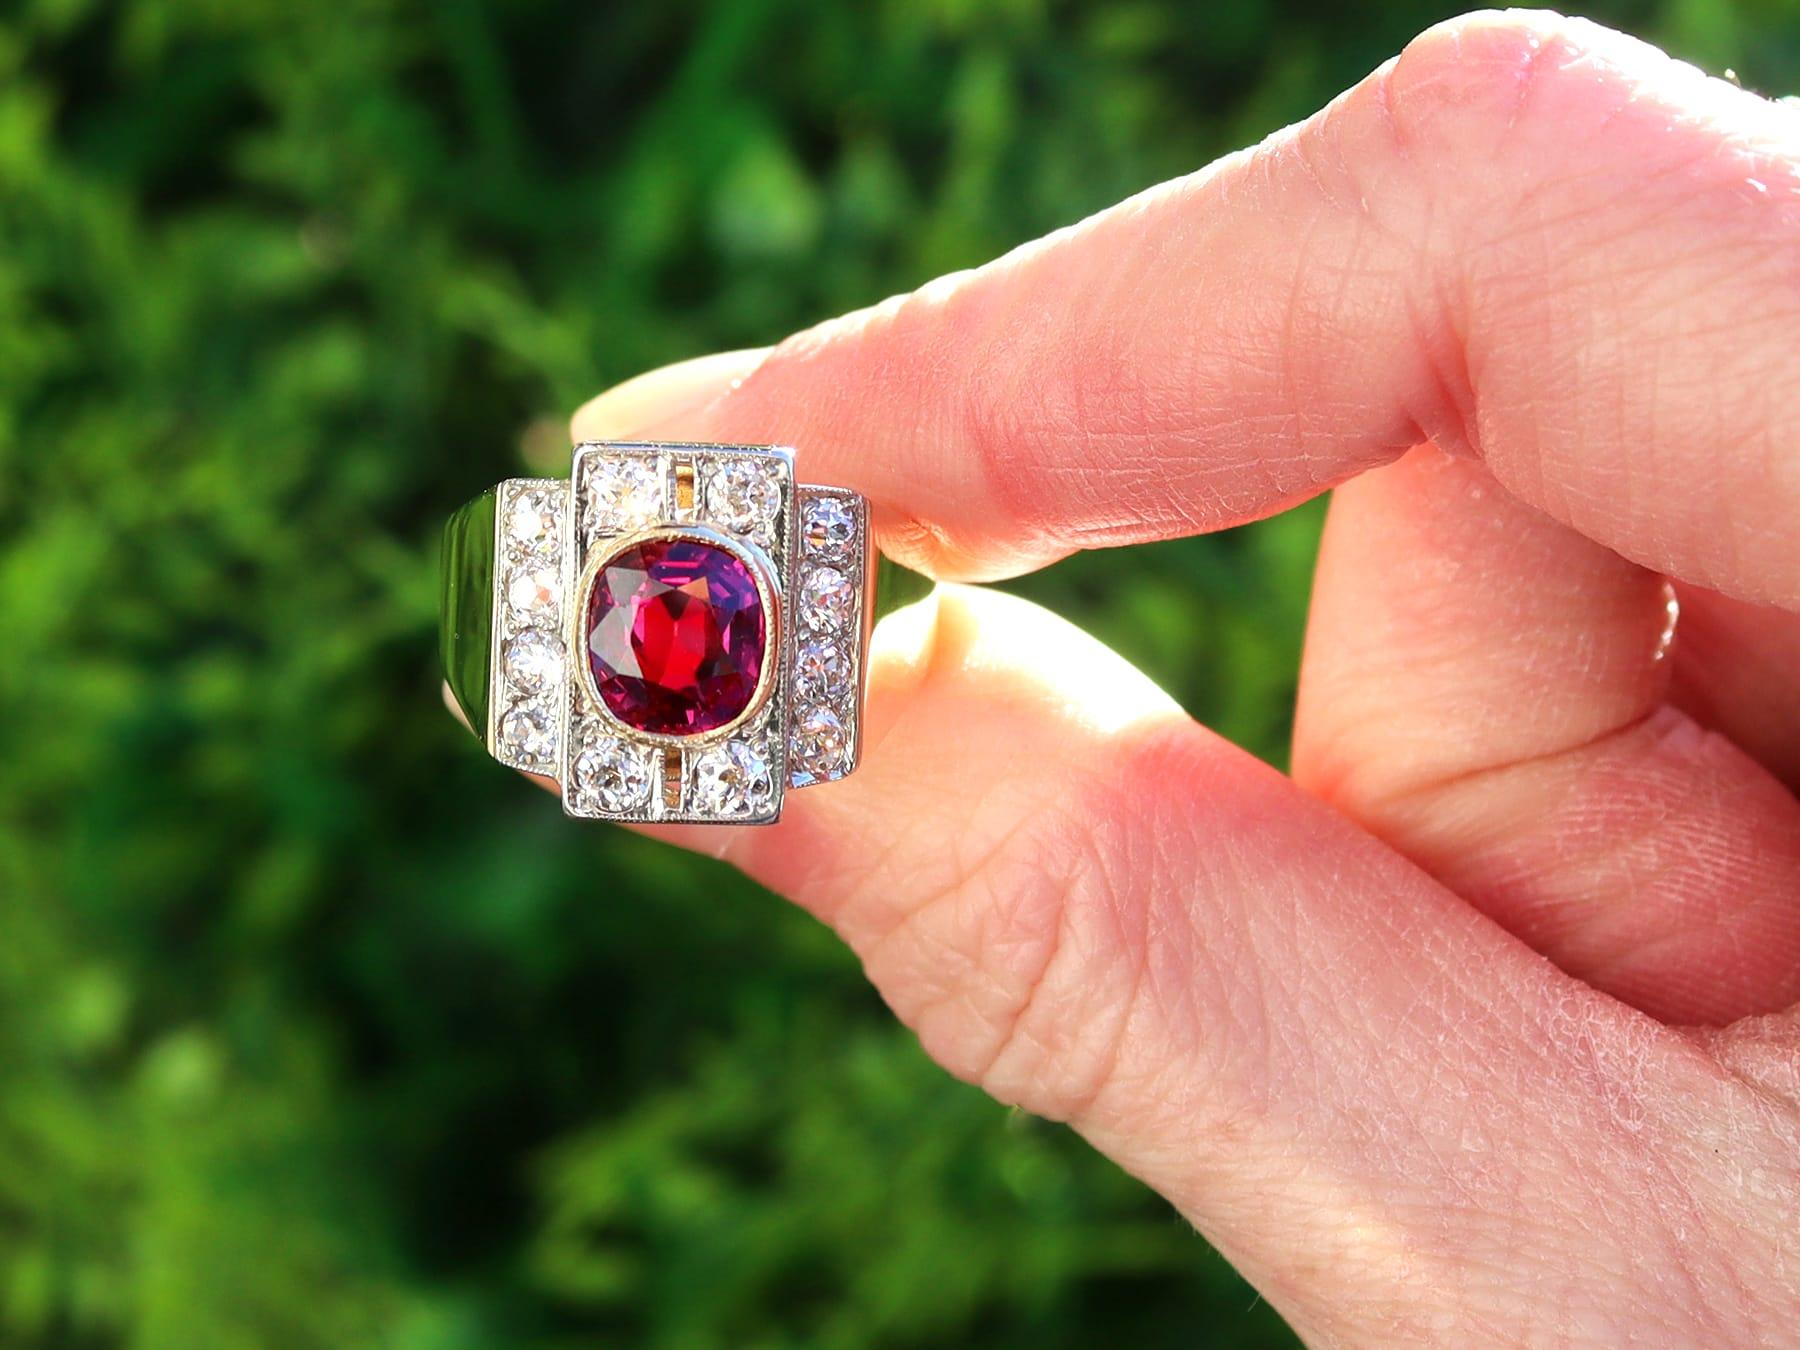 A stunning, fine and impressive vintage 2.84 carat Thai ruby and 1.45 carat diamond, 18 karat yellow gold and 18 karat white gold set dress ring; part of our diverse vintage jewellery and estate jewelry collections

This stunning, fine and